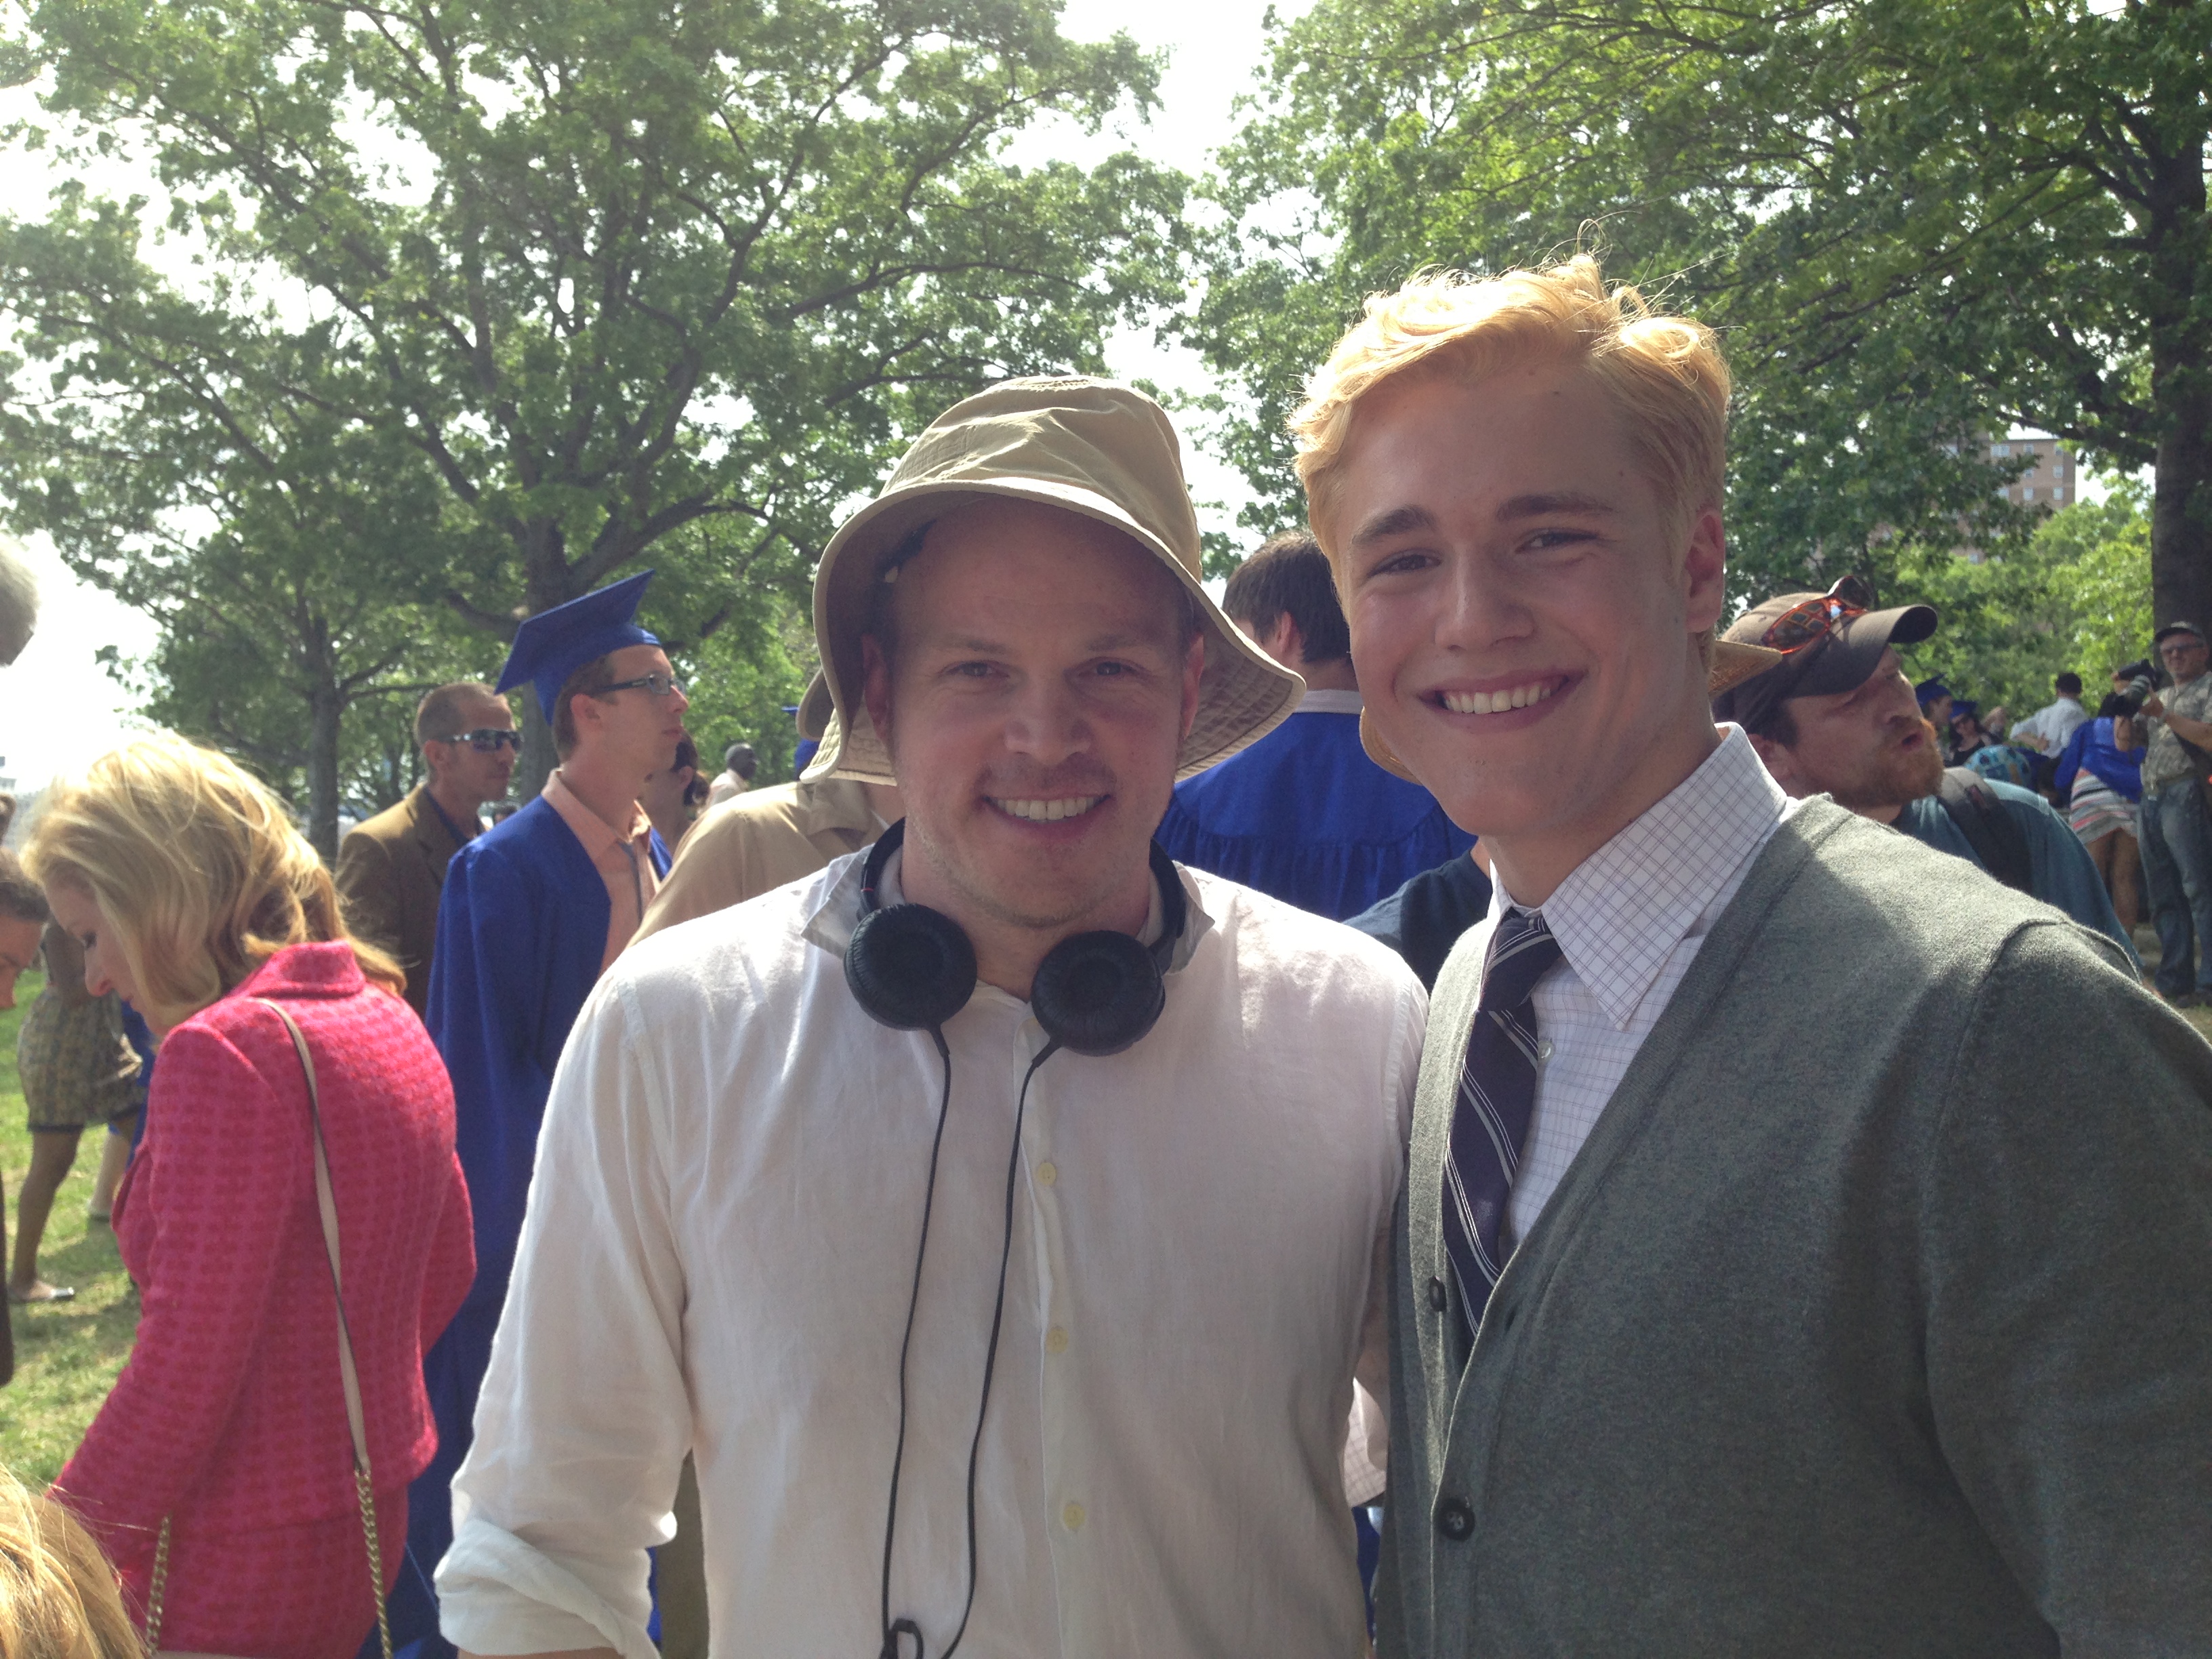 Charlie DePew with The Amazing Spider-Man Director Marc Webb